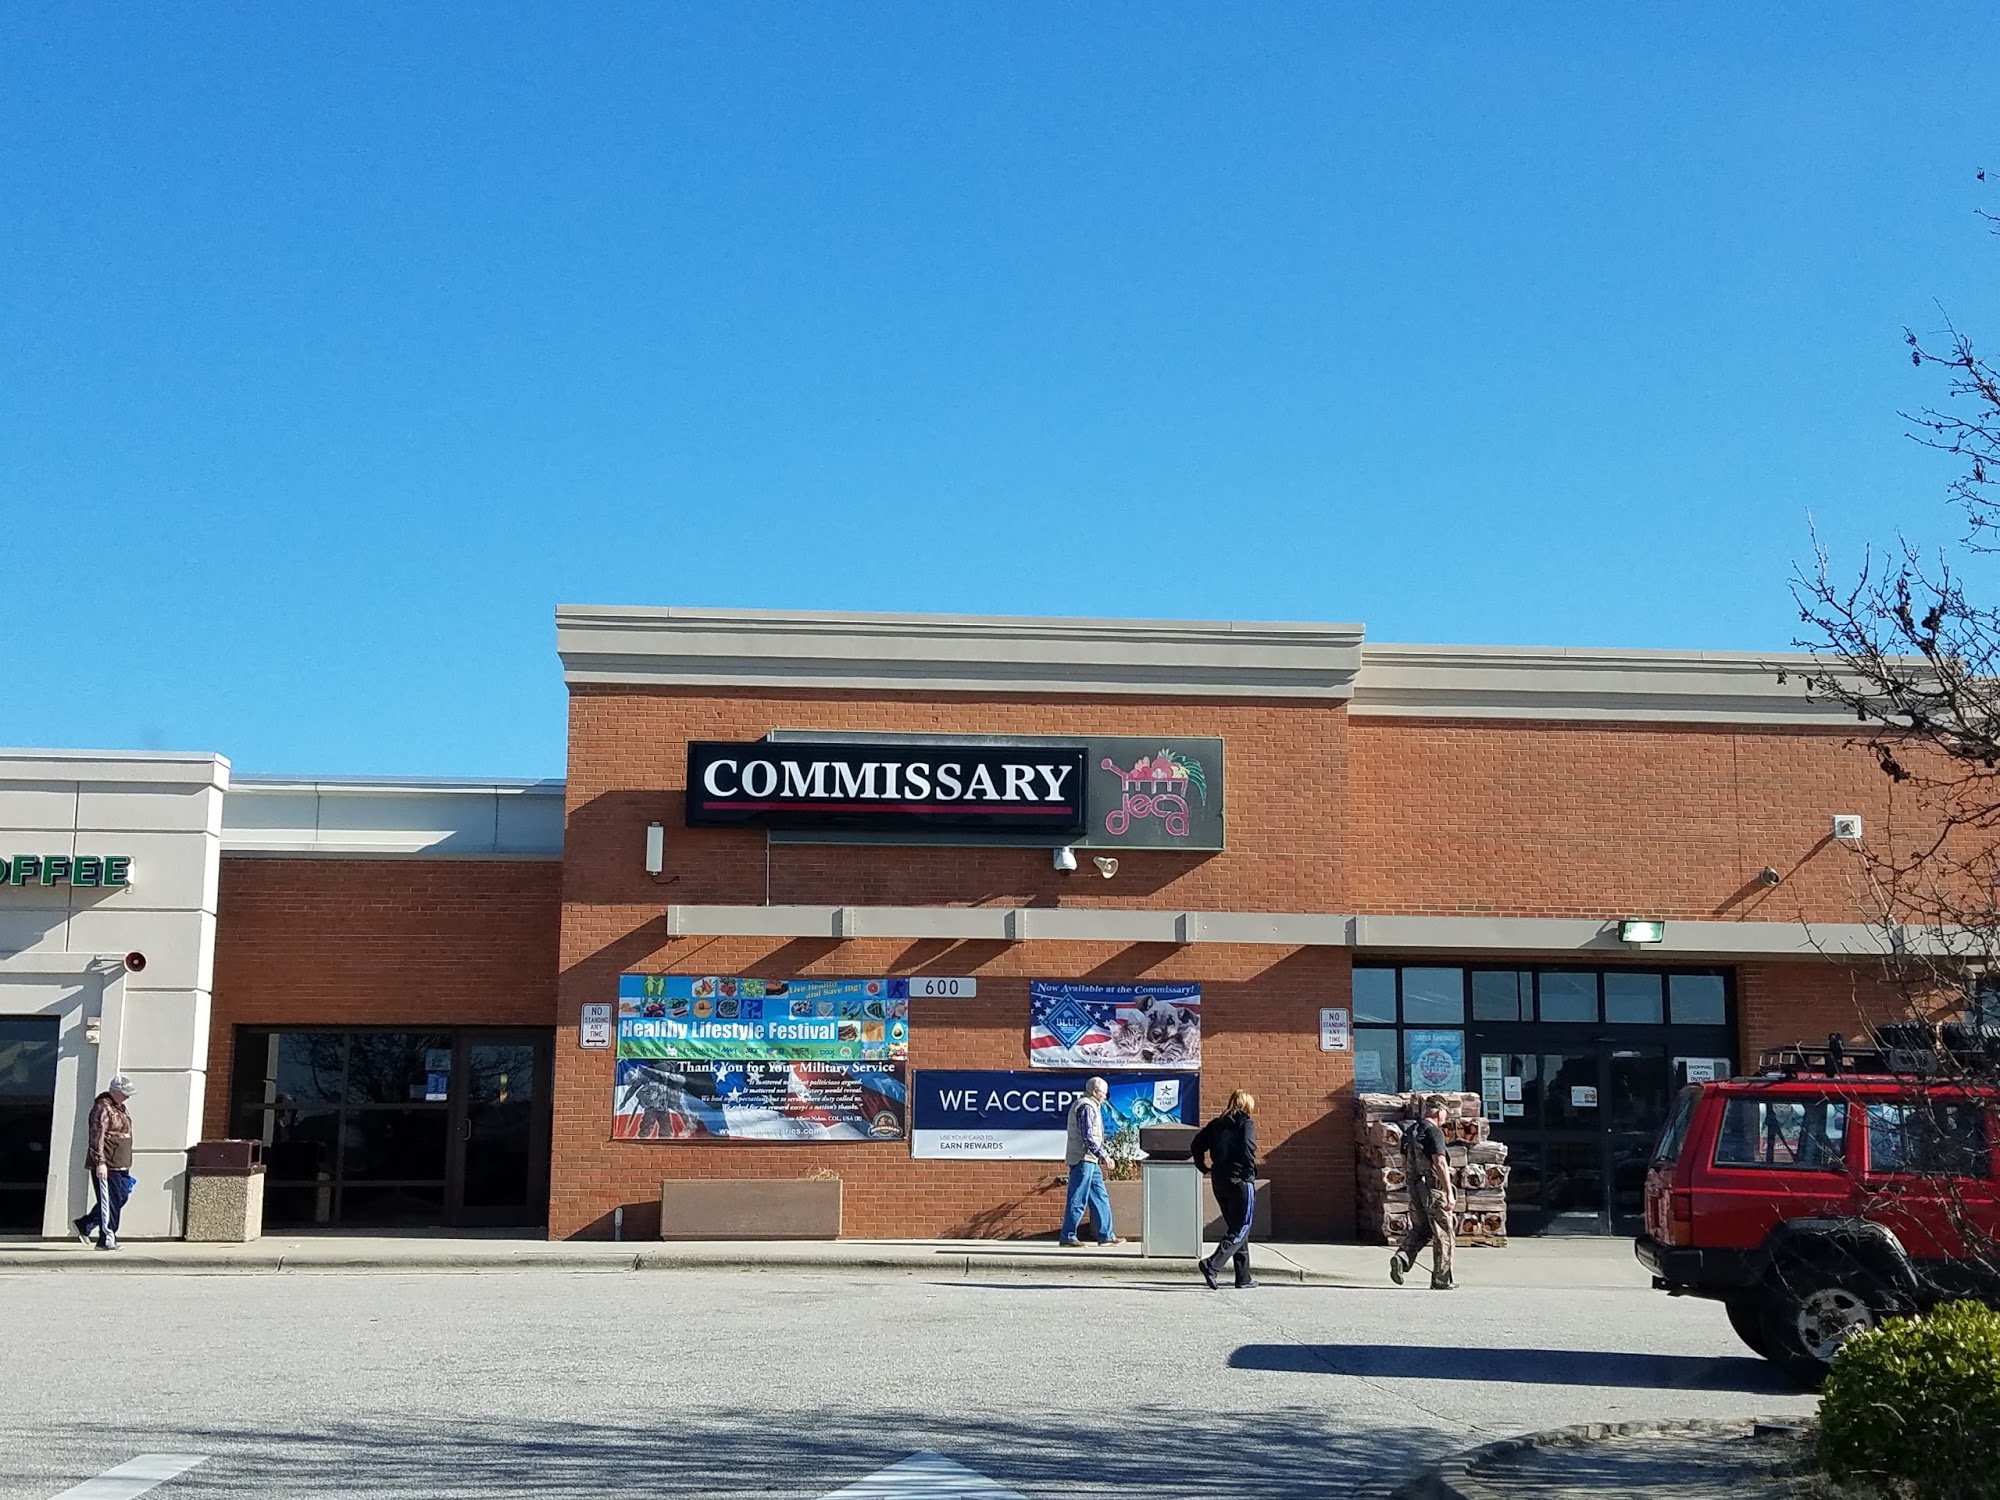 North Post Commissary